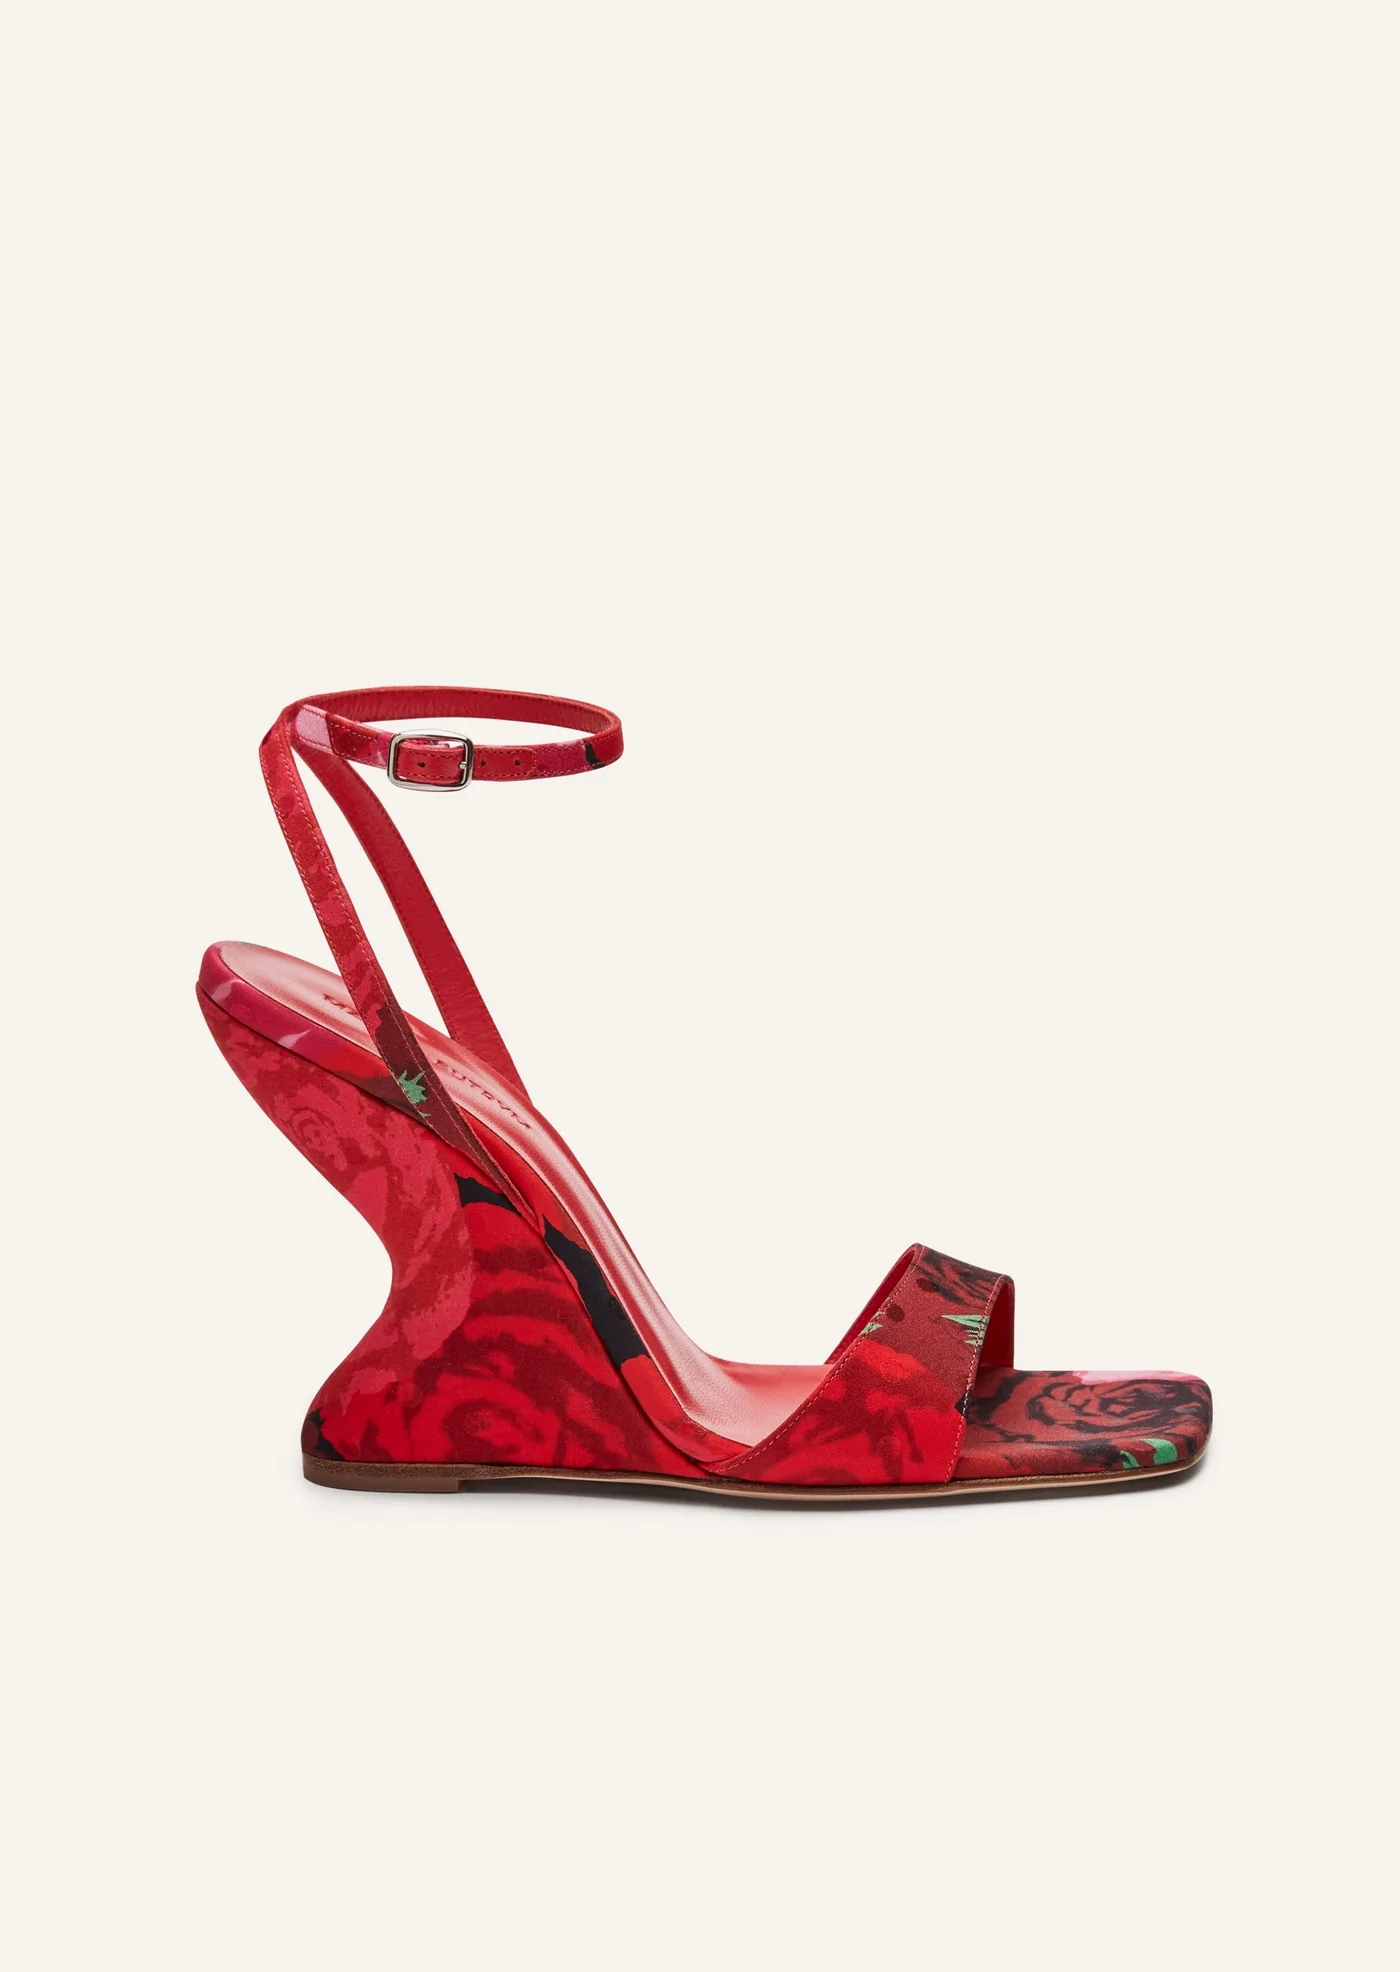 15.MAGDA BUTRYM Inverted Wedge Strappy Sandals In Red Roses Print€357, 